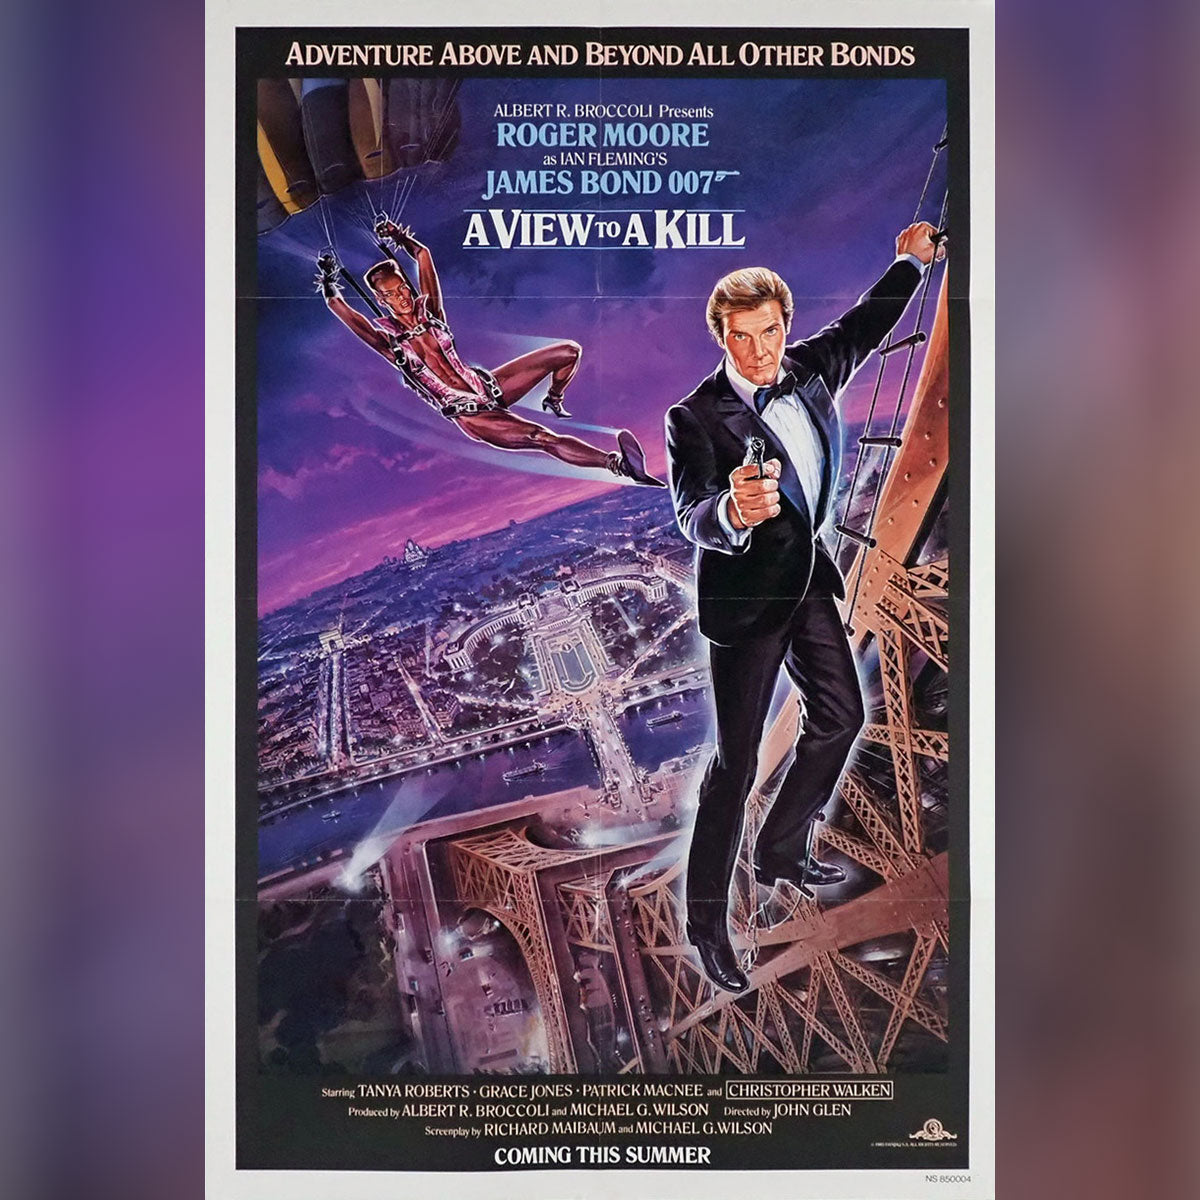 A View To Kill (1985)